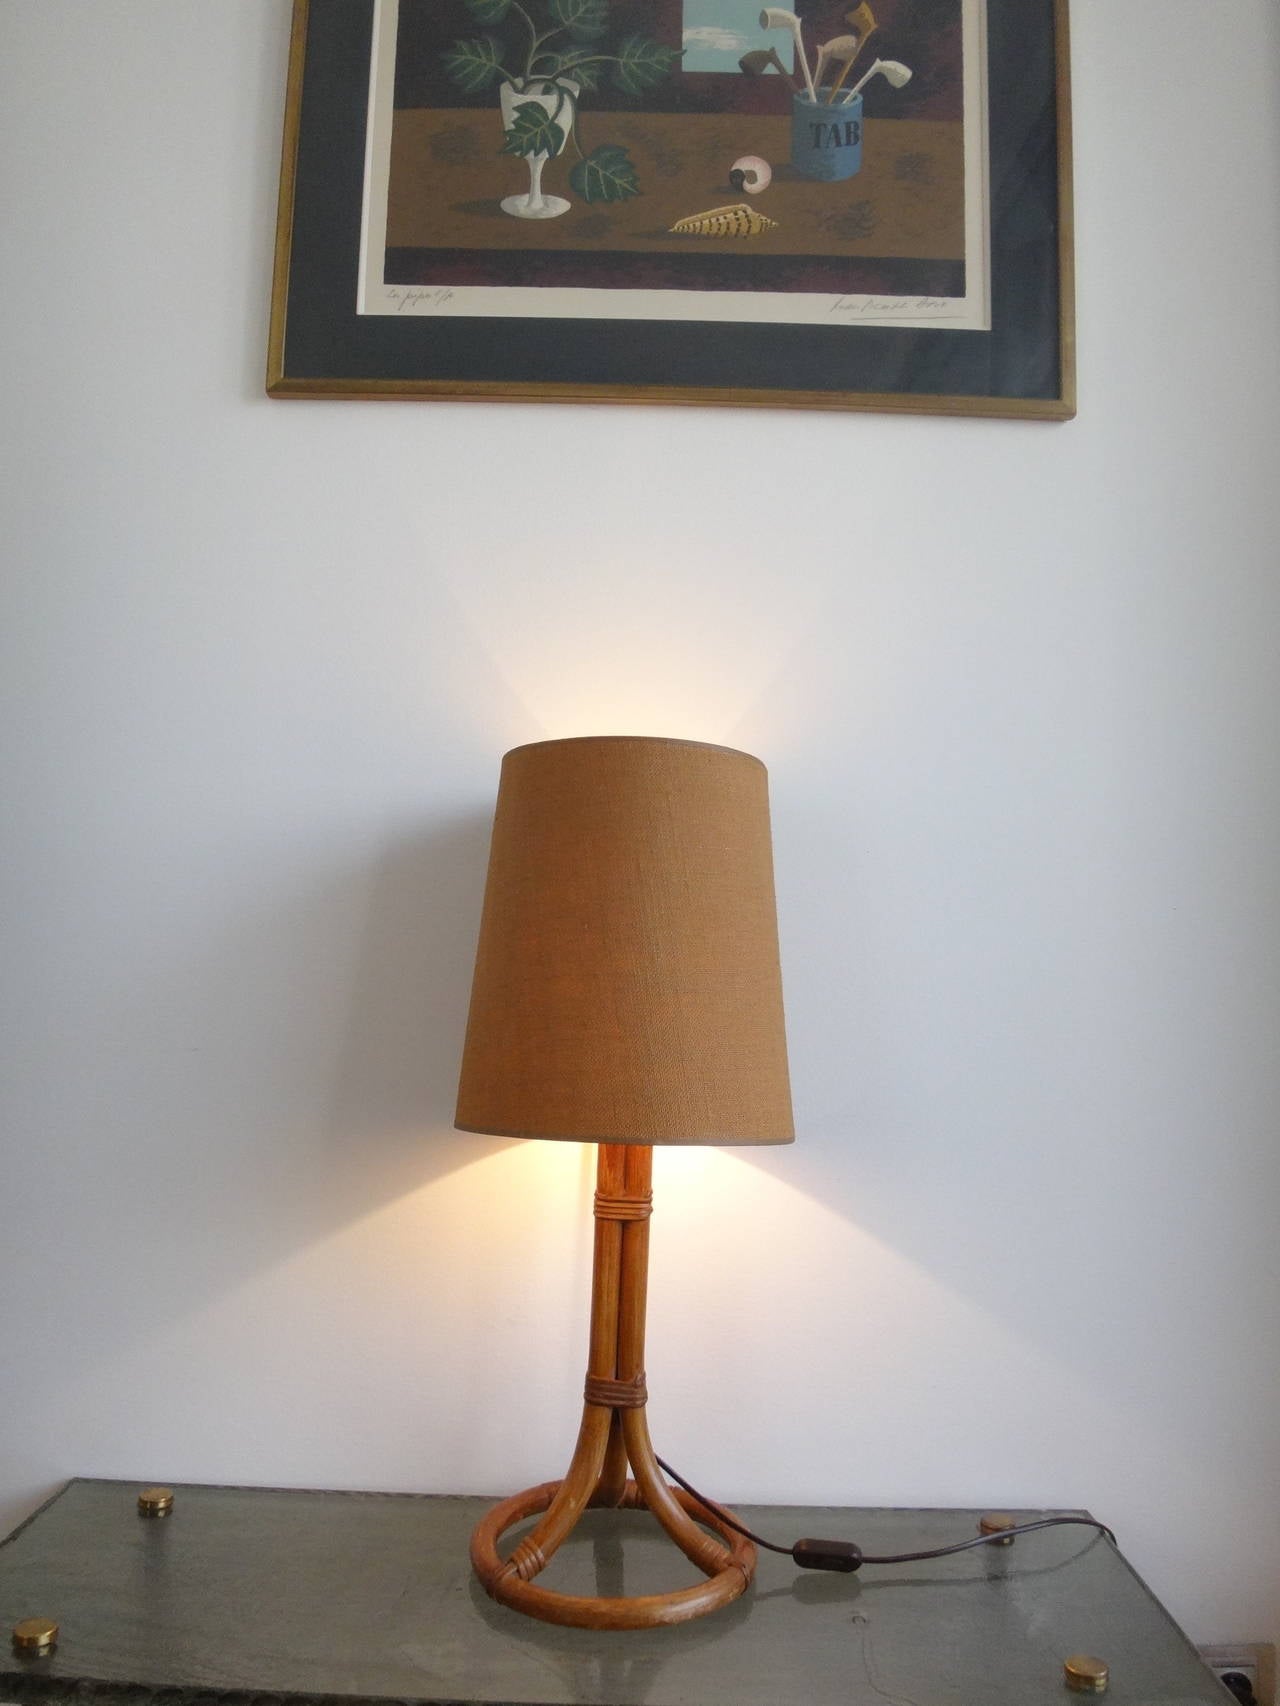 Mid-20th Century Table lamp by Louis Sognot - France 1960's - Ipso Facto